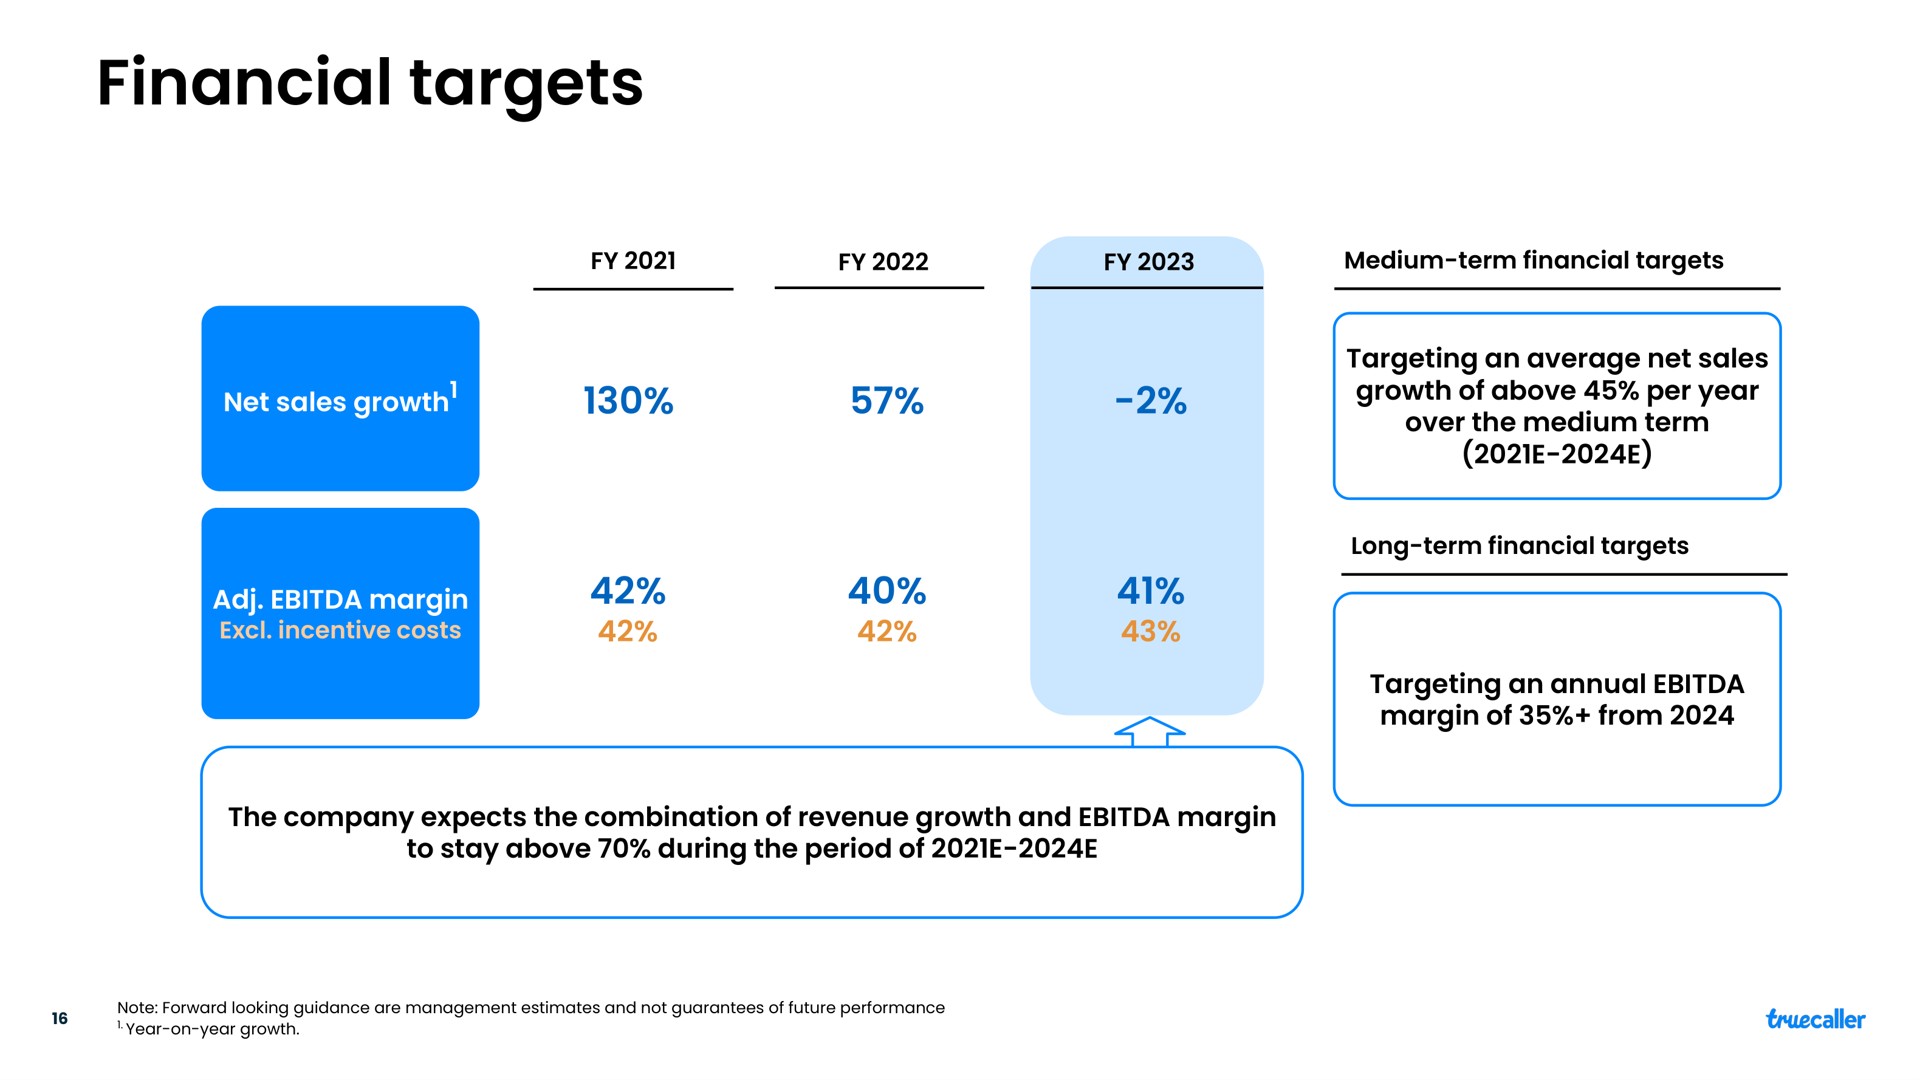 financial targets medium term financial targets net sales growth margin incentive costs targeting an average net sales growth of above per year over the medium term long term financial targets targeting an annual margin of from the company expects the combination of revenue growth and margin to stay above during the period of | Truecaller